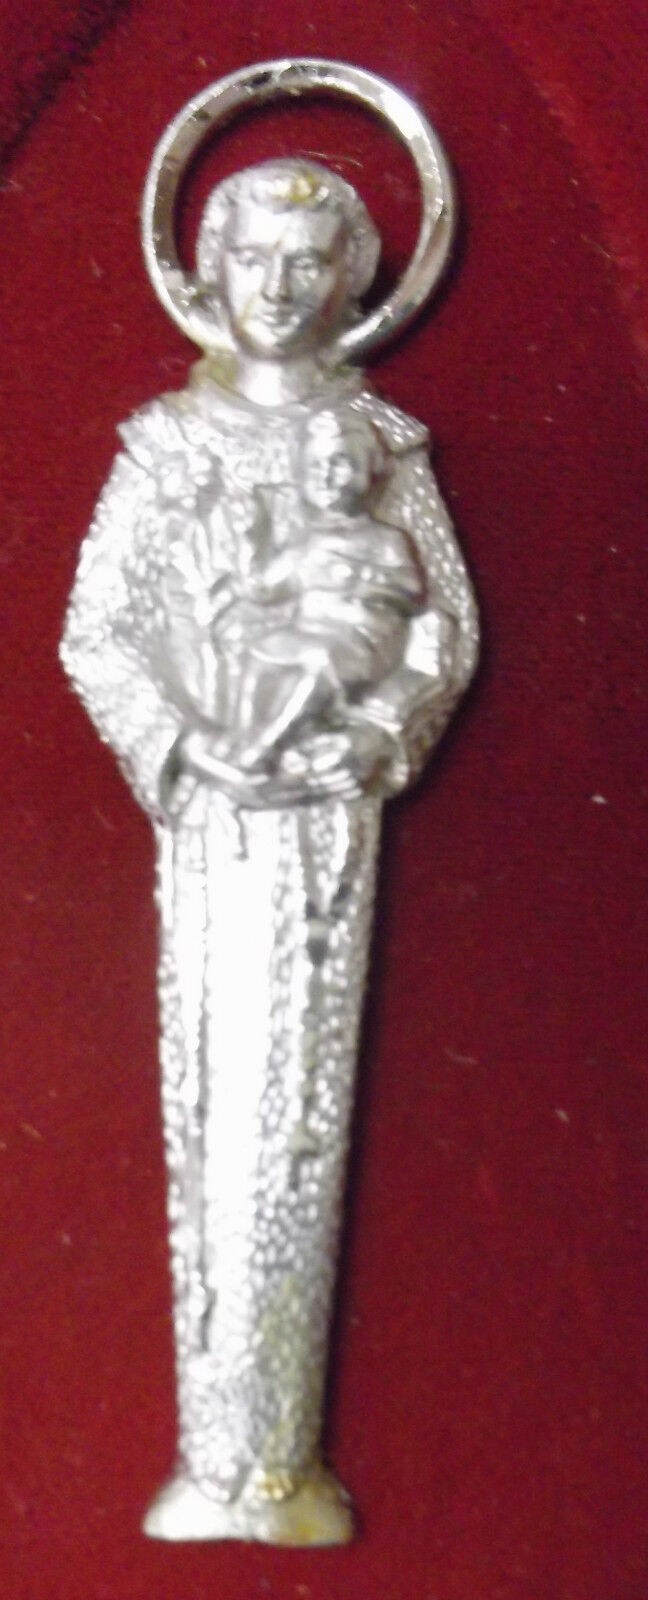 Saint Anthony Pewter Image  Engraved on Red Velvet Frame, New from Italy - Bob and Penny Lord